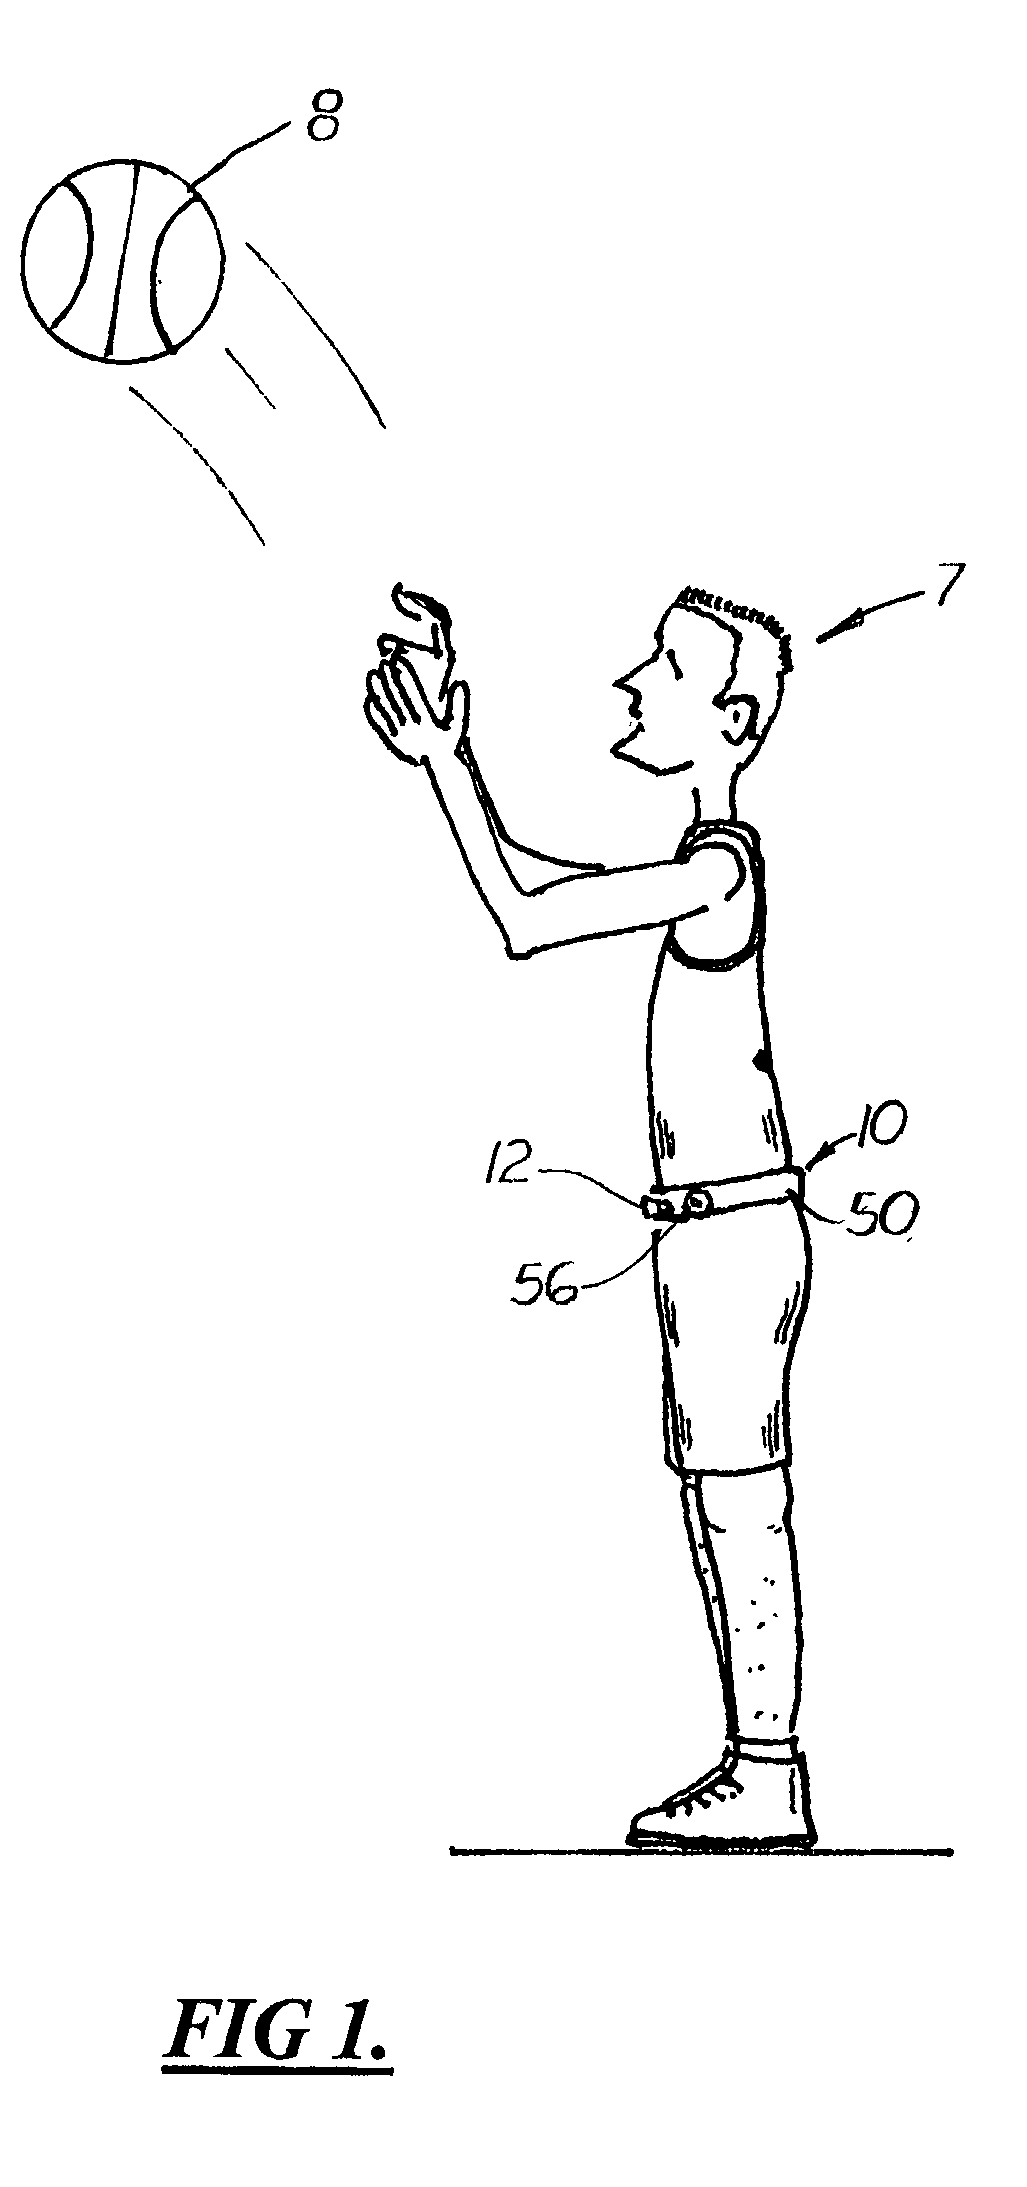 Basketball training and game device